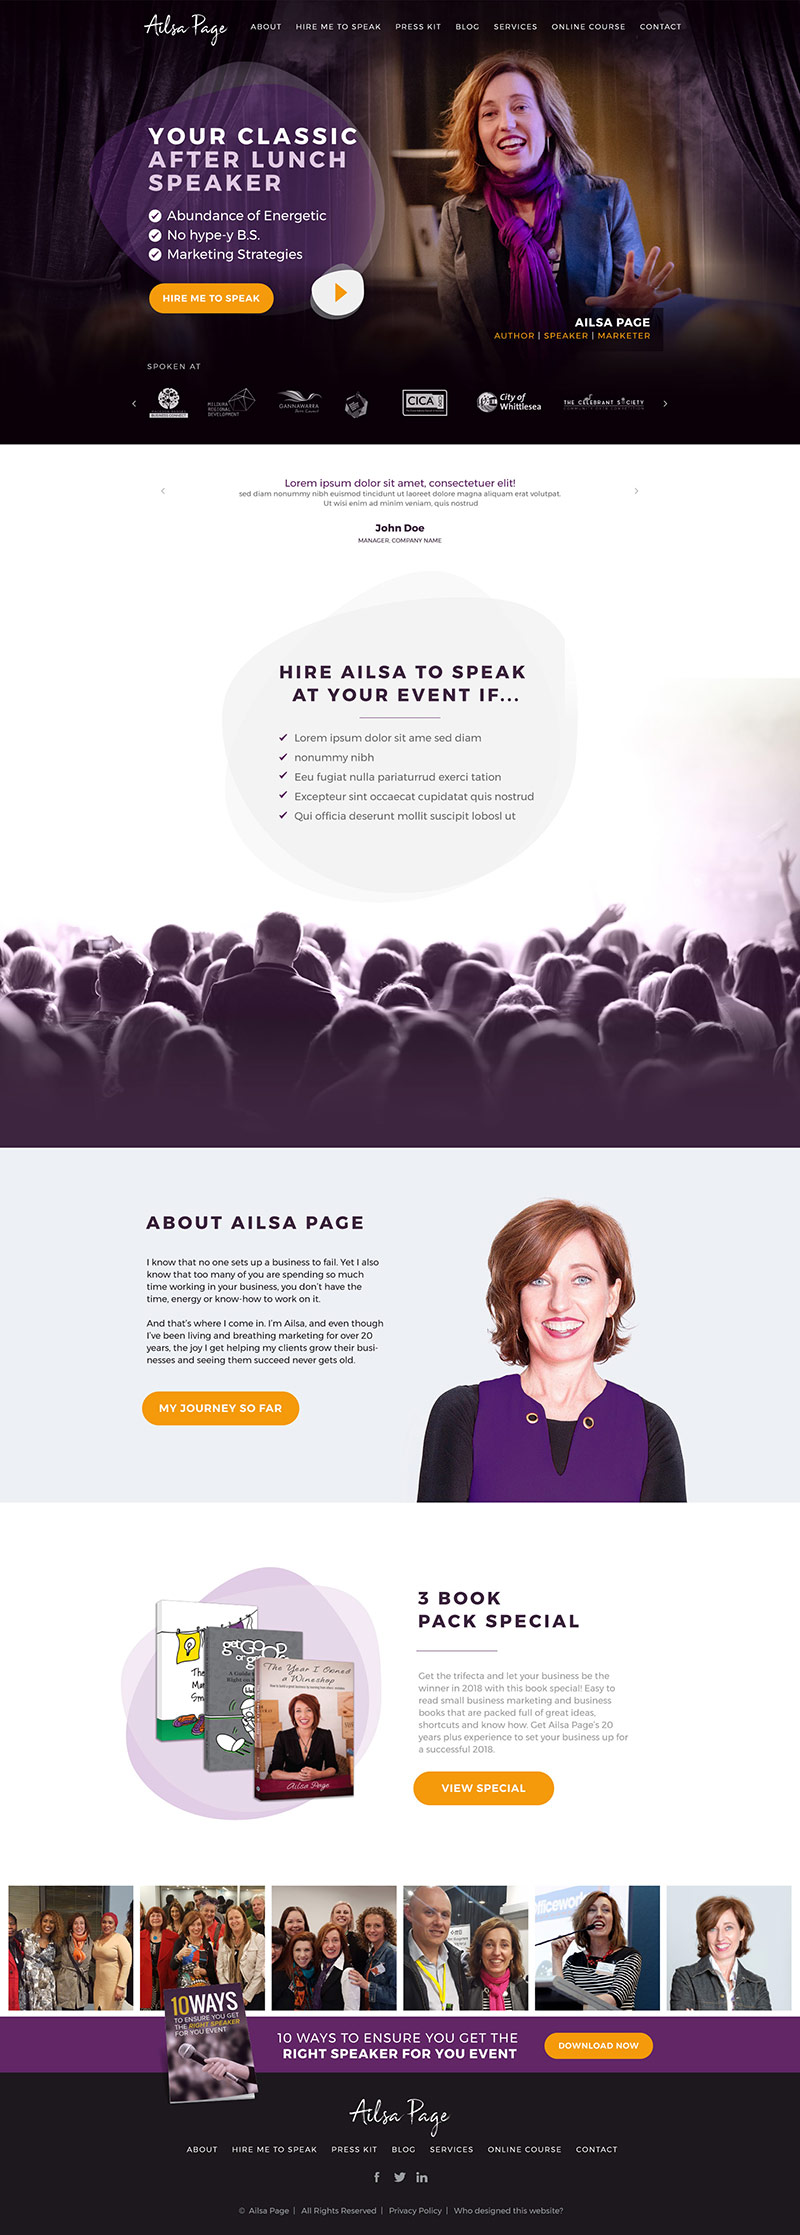 AILSA PAGE HOMEPAGE